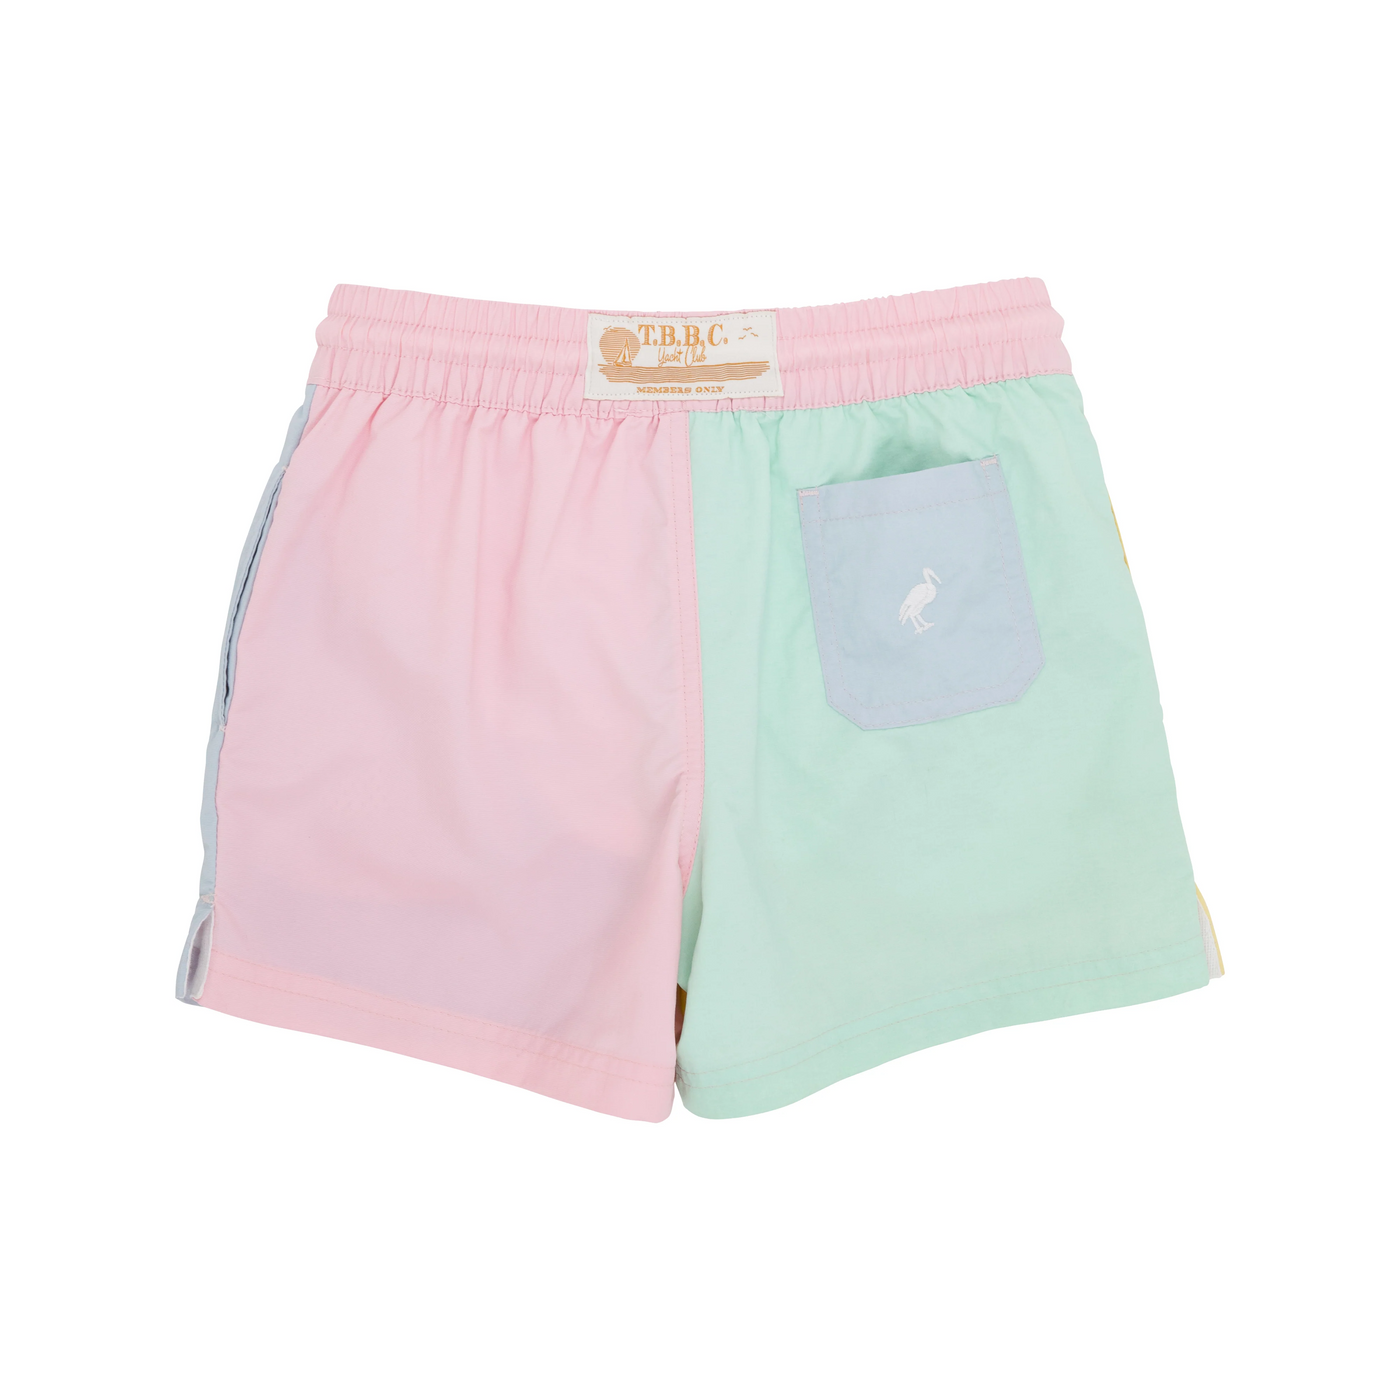 Country Club Colorblock Trunks - Preppy Pastels